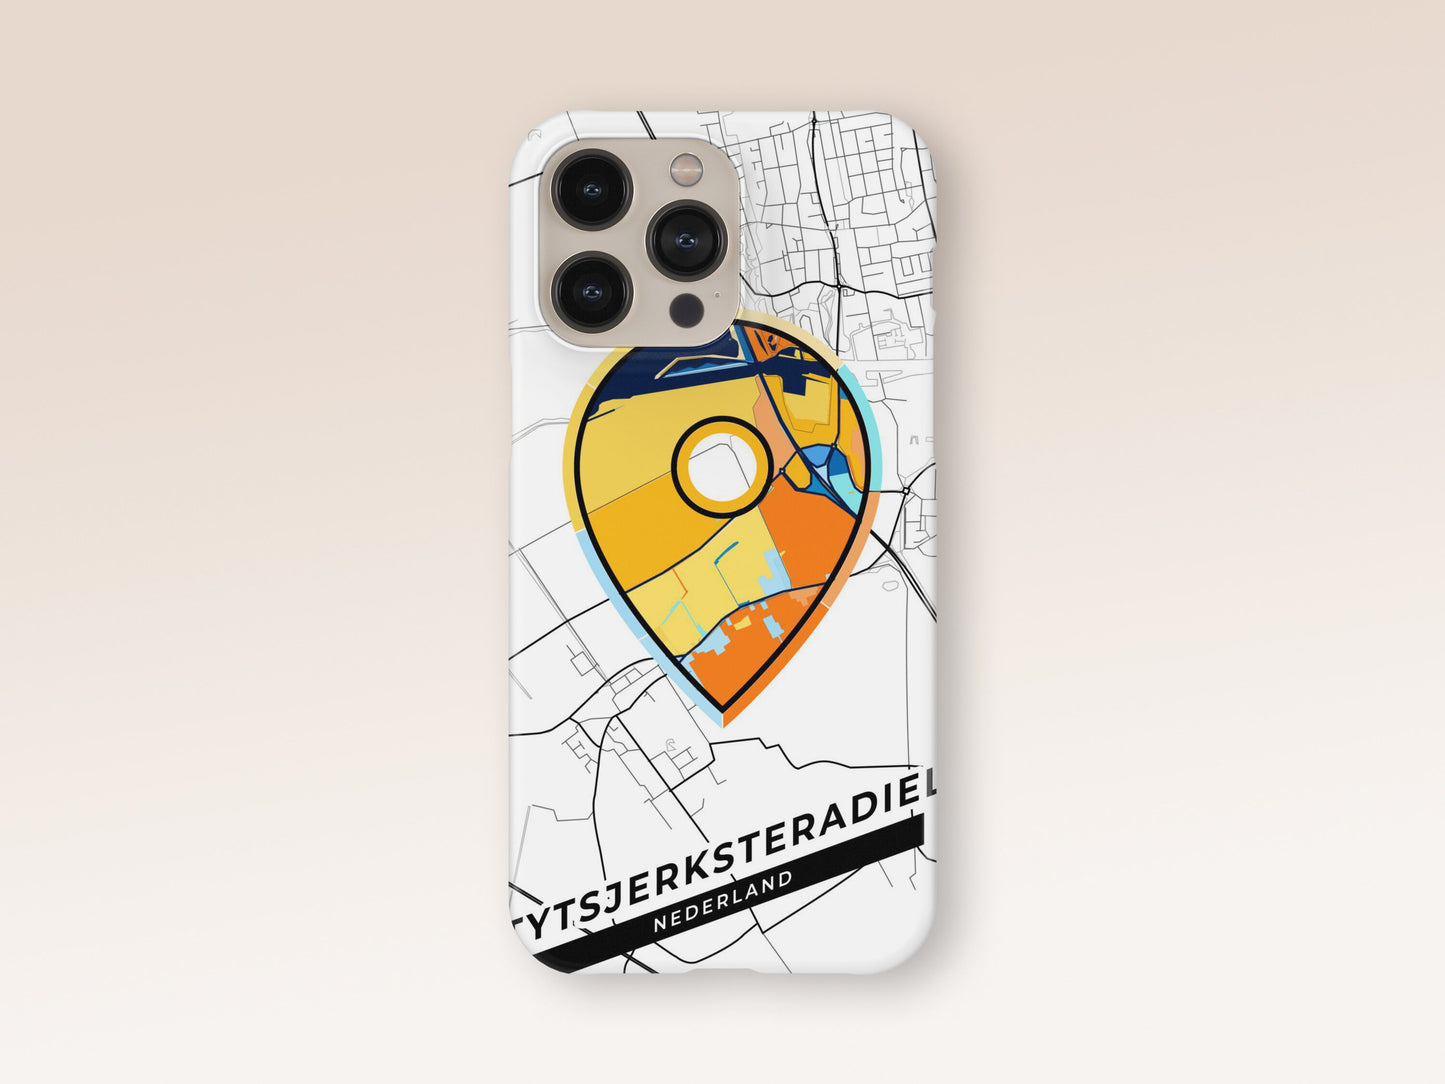 Tytsjerksteradiel Netherlands slim phone case with colorful icon 1